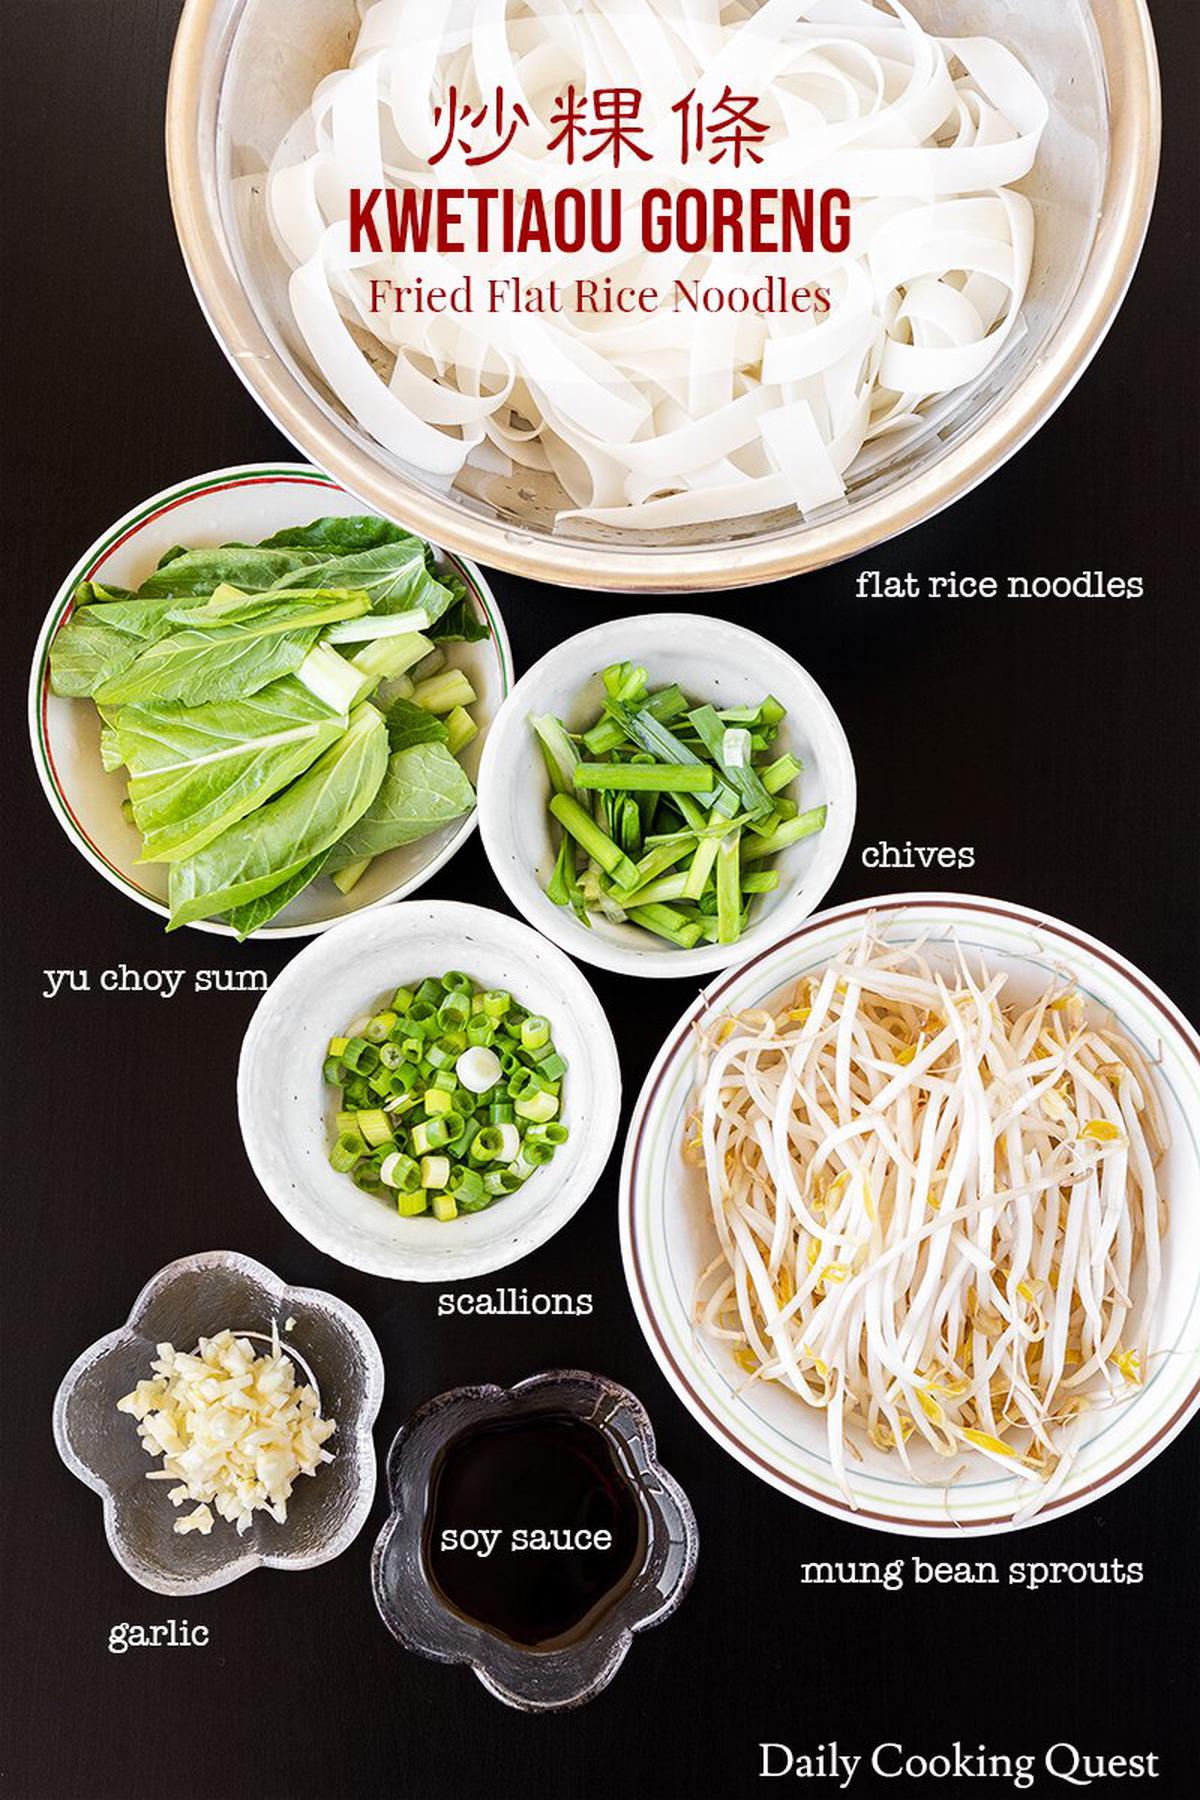 Ingredients to prepare kwetiau goreng (fried flat rice noodles): flat rice noodles, yu choy sum, chives, scallions, mung bean sprouts, garlic, and soy sauce.